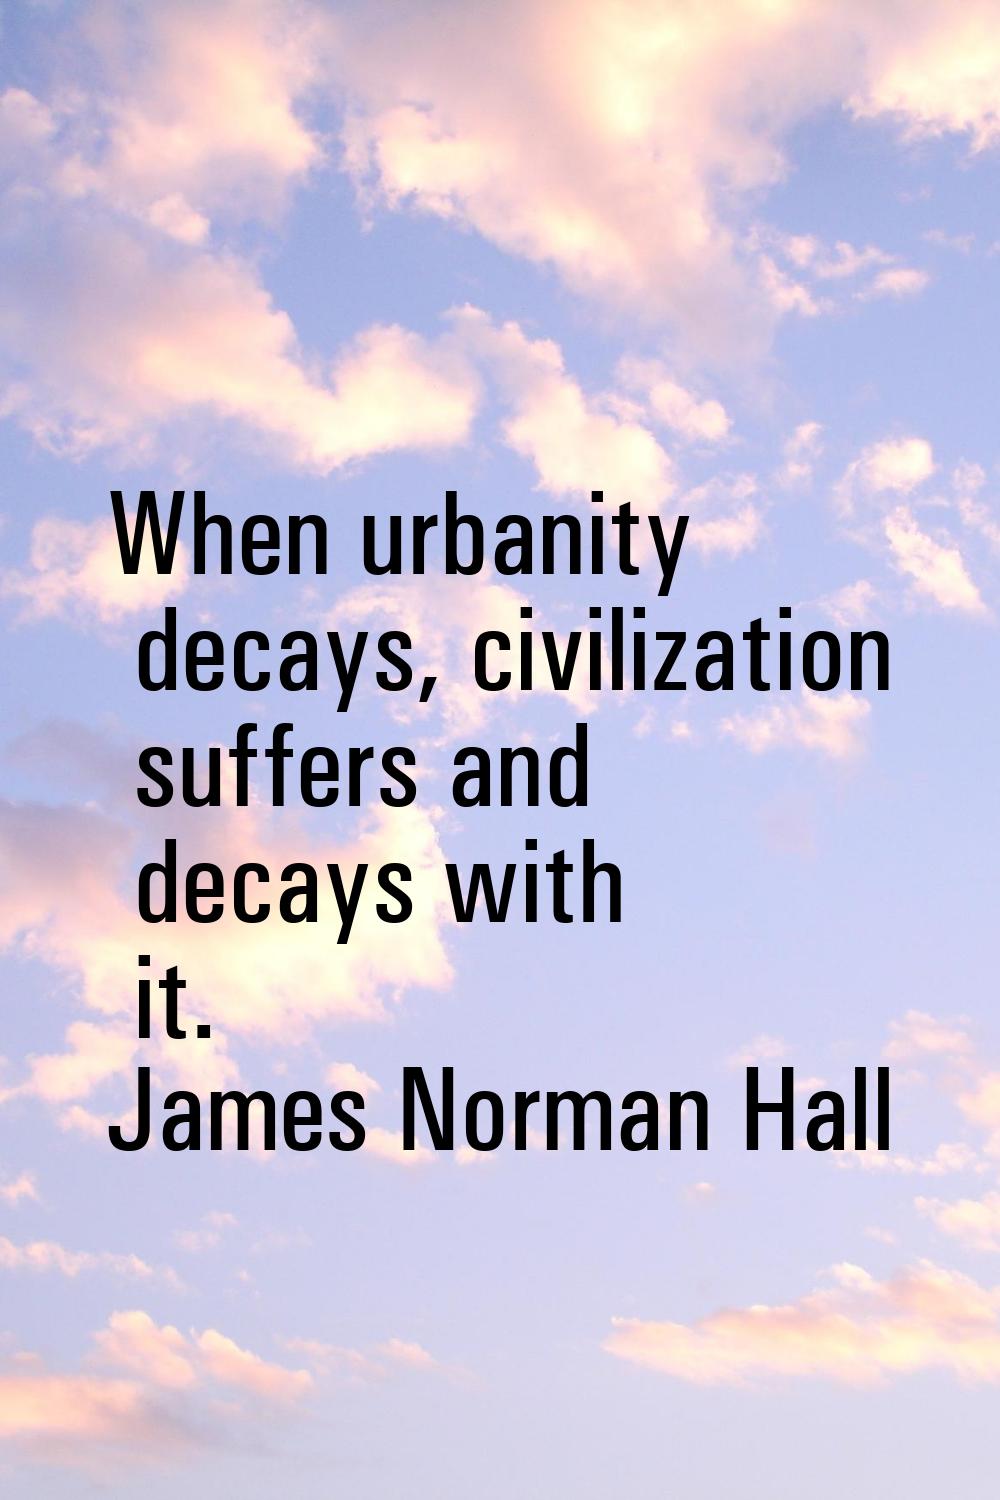 When urbanity decays, civilization suffers and decays with it.